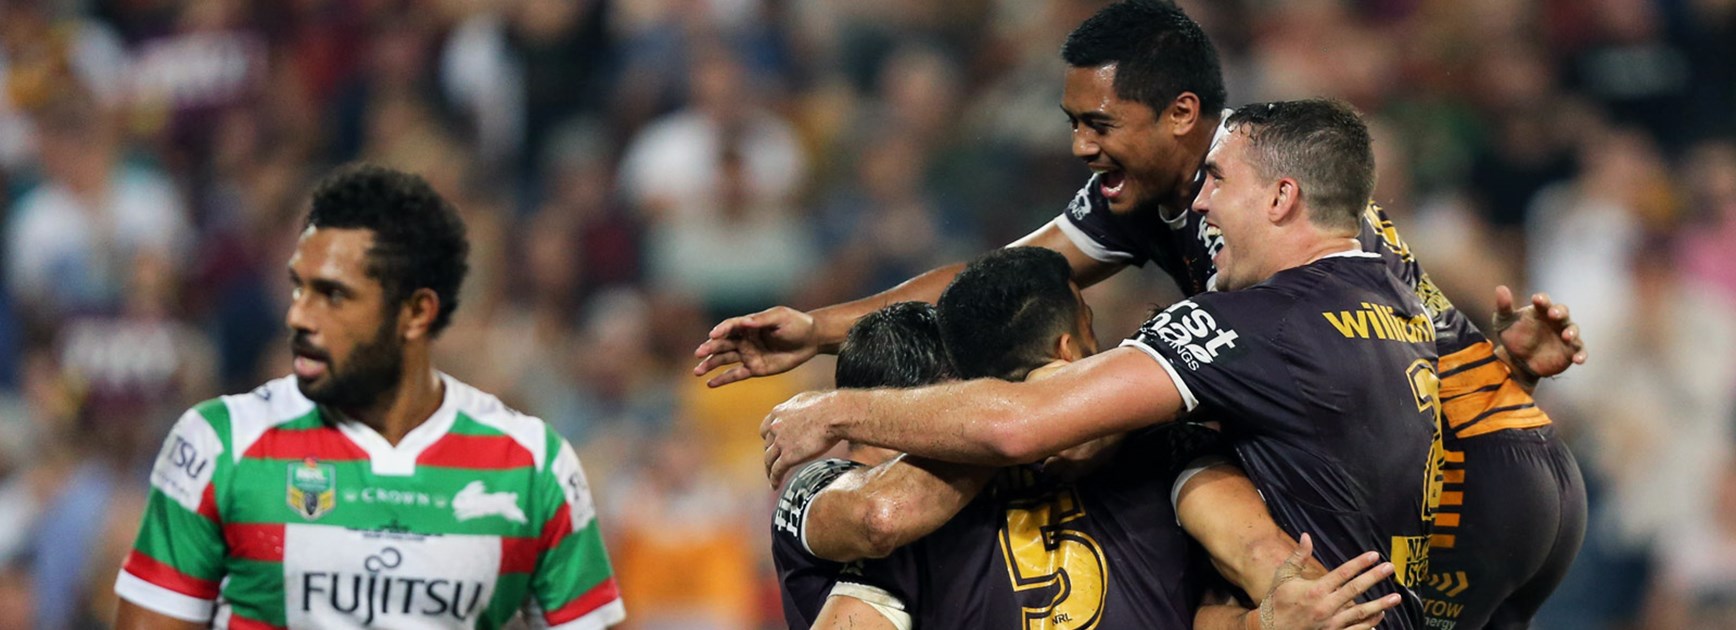 Broncos players celebrate their Round 8 win over the Rabbitohs.